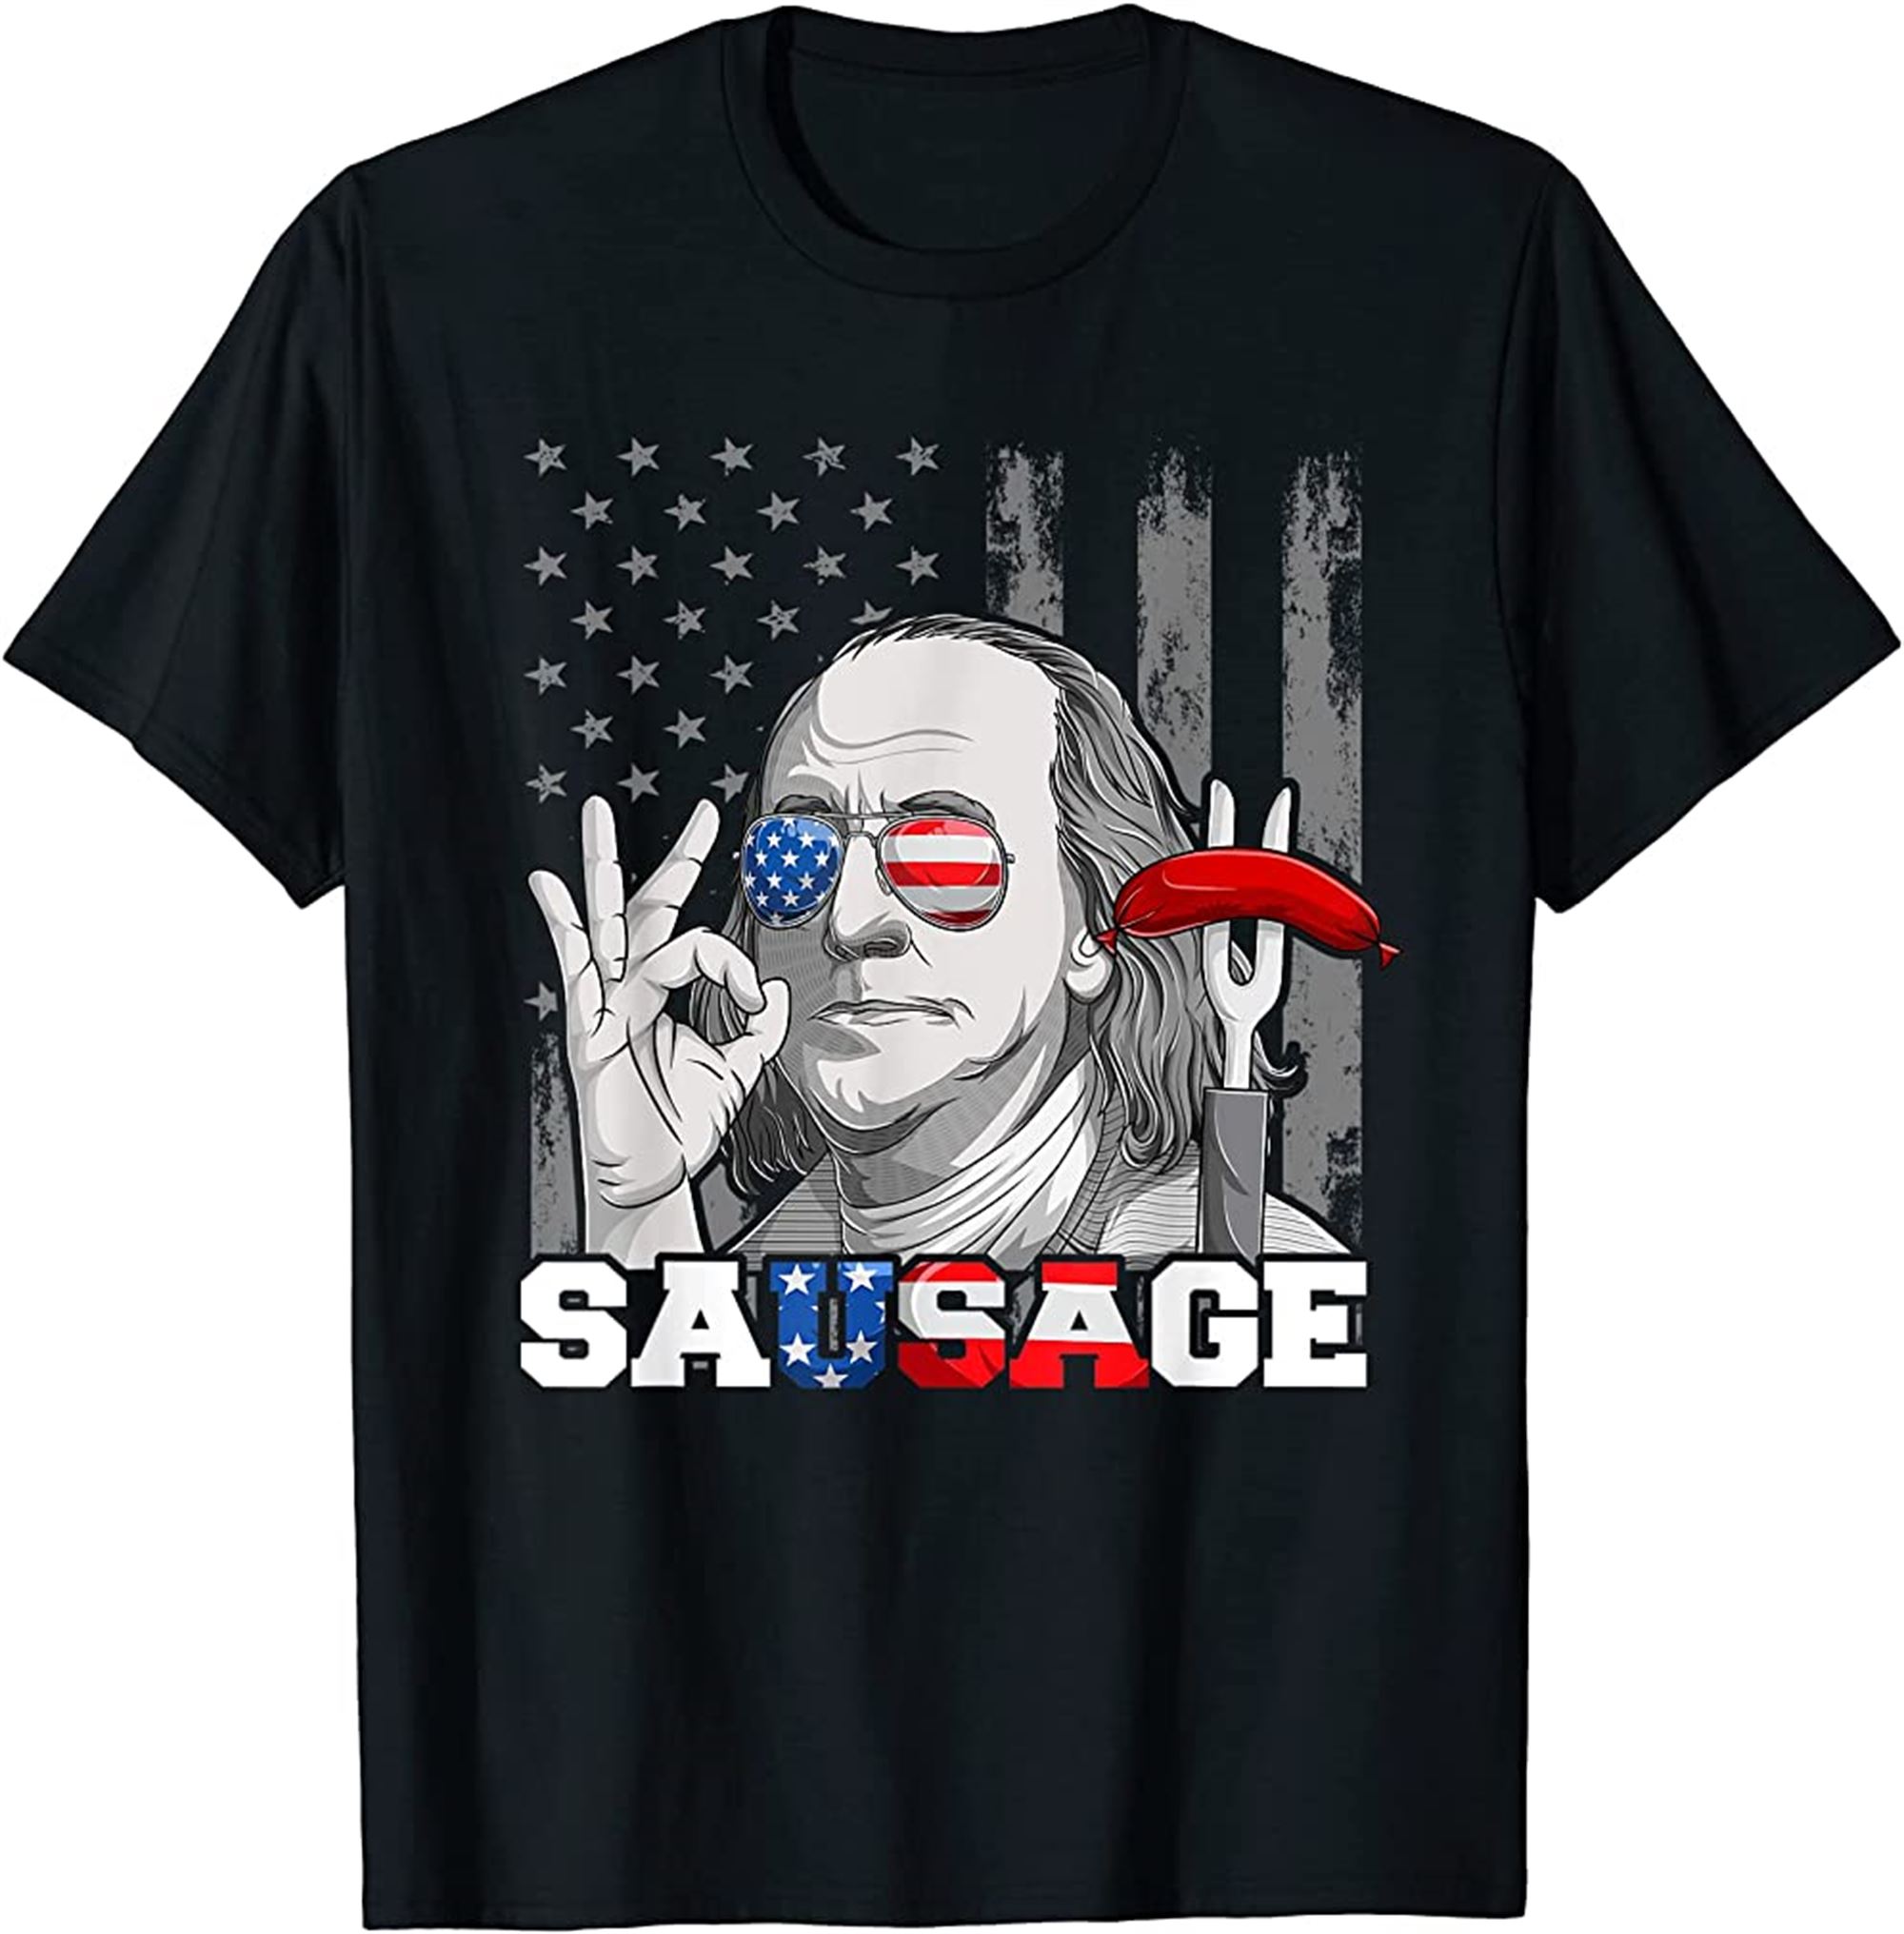 Sausage Benjamin Franklin 4th Of July Shirts American Flag T-shirt Size Up To 5xl